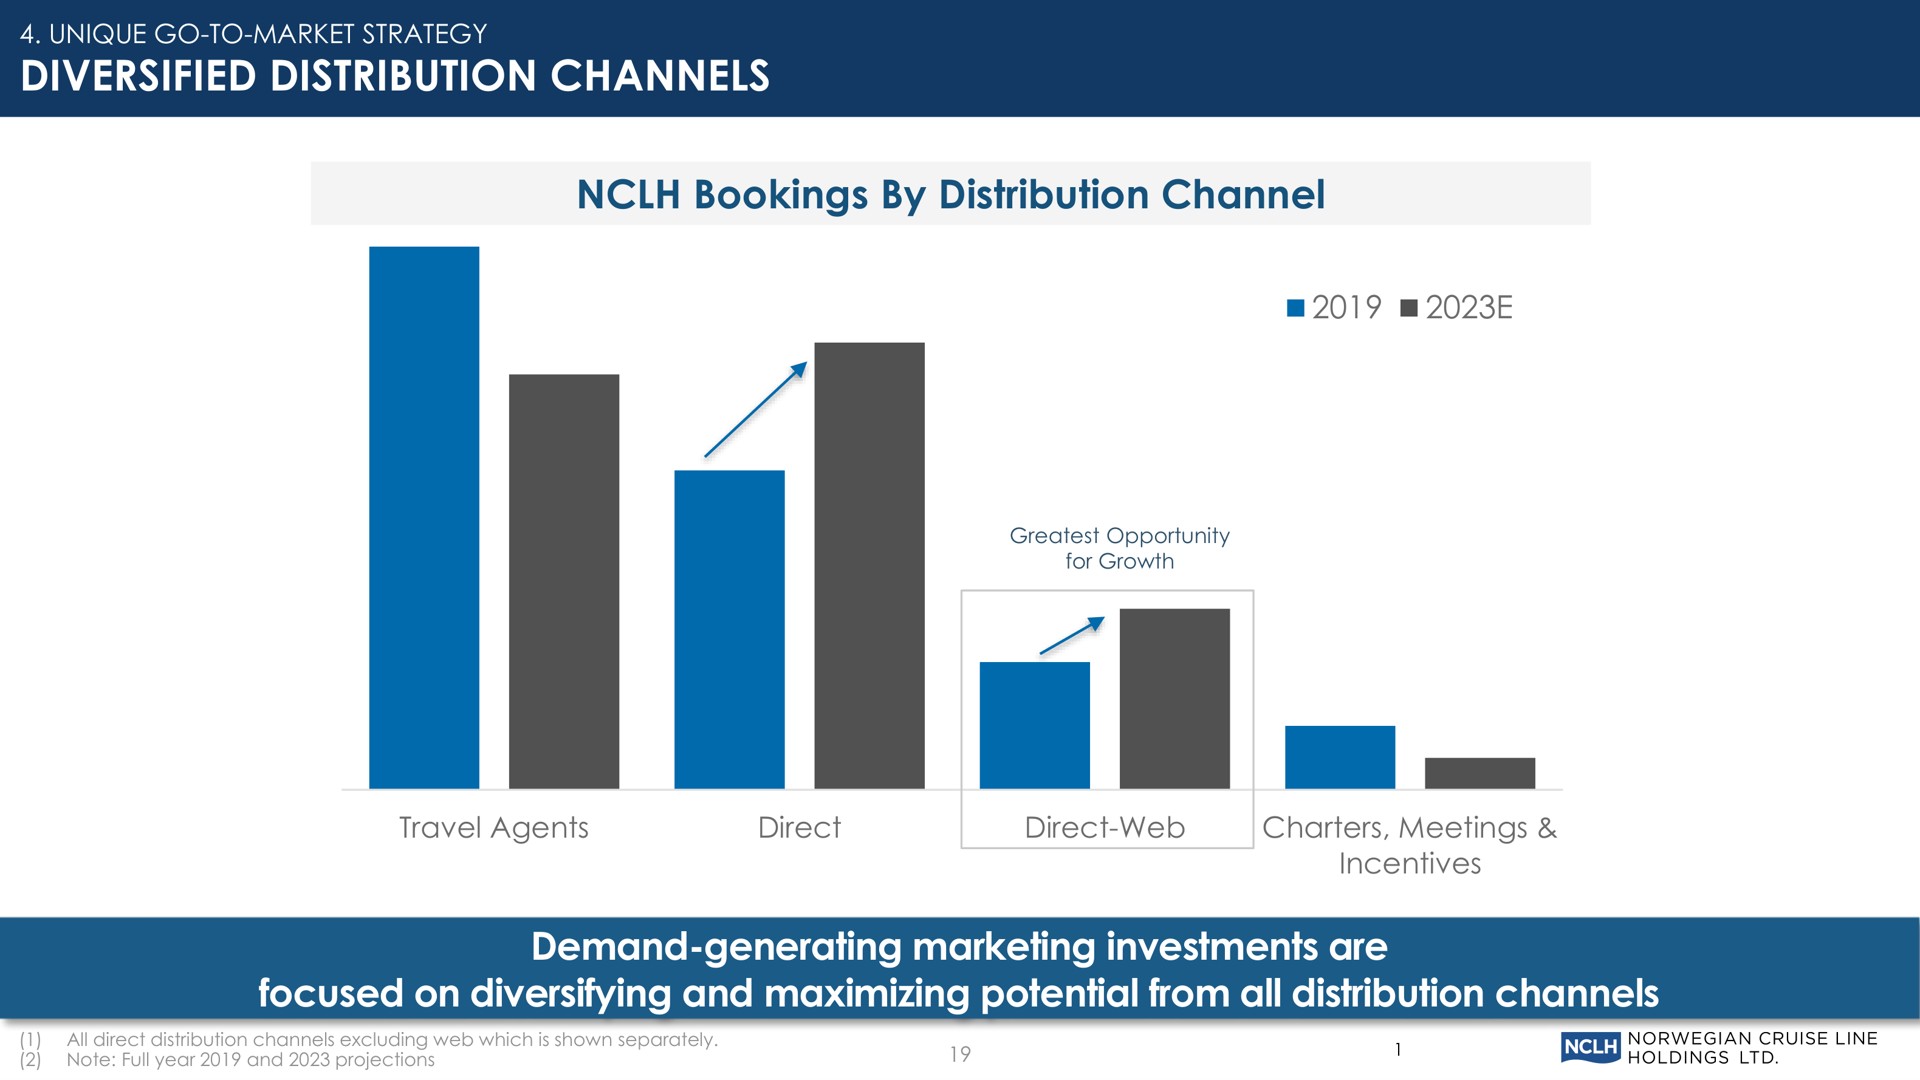 diversified distribution channels bookings by distribution channel demand generating marketing investments are focused on diversifying and maximizing potential from all distribution channels | Norwegian Cruise Line